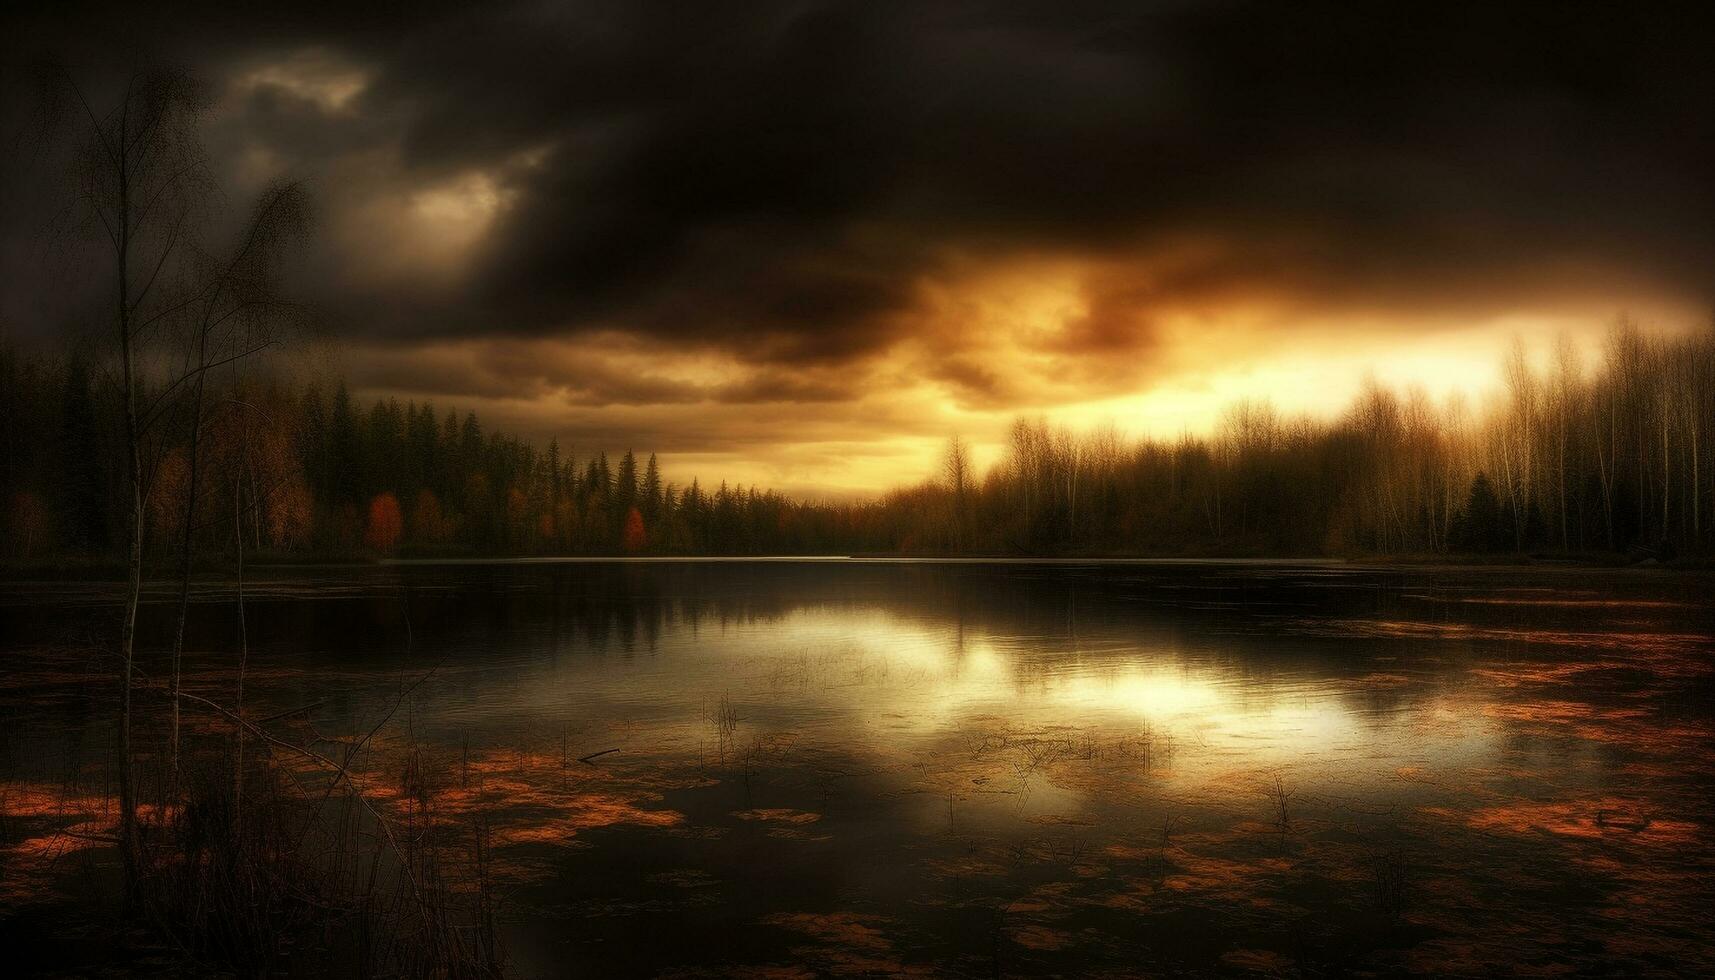 Tranquil scene of autumn forest by pond generated by AI photo